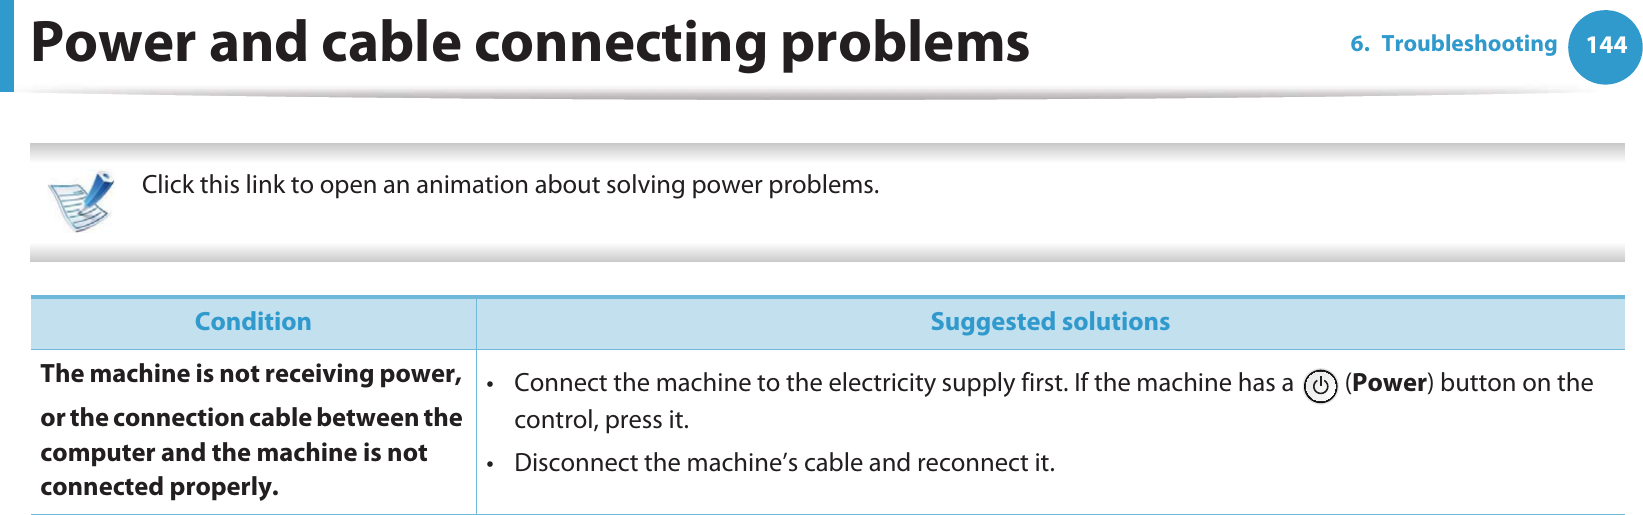 1446. TroubleshootingPower and cable connecting problems Click this link to open an animation about solving power problems.   Condition Suggested solutionsThe machine is not receiving power, or the connection cable between the computer and the machine is not connected properly.• Connect the machine to the electricity supply first. If the machine has a   (Power) button on the control, press it. • Disconnect the machine’s cable and reconnect it.